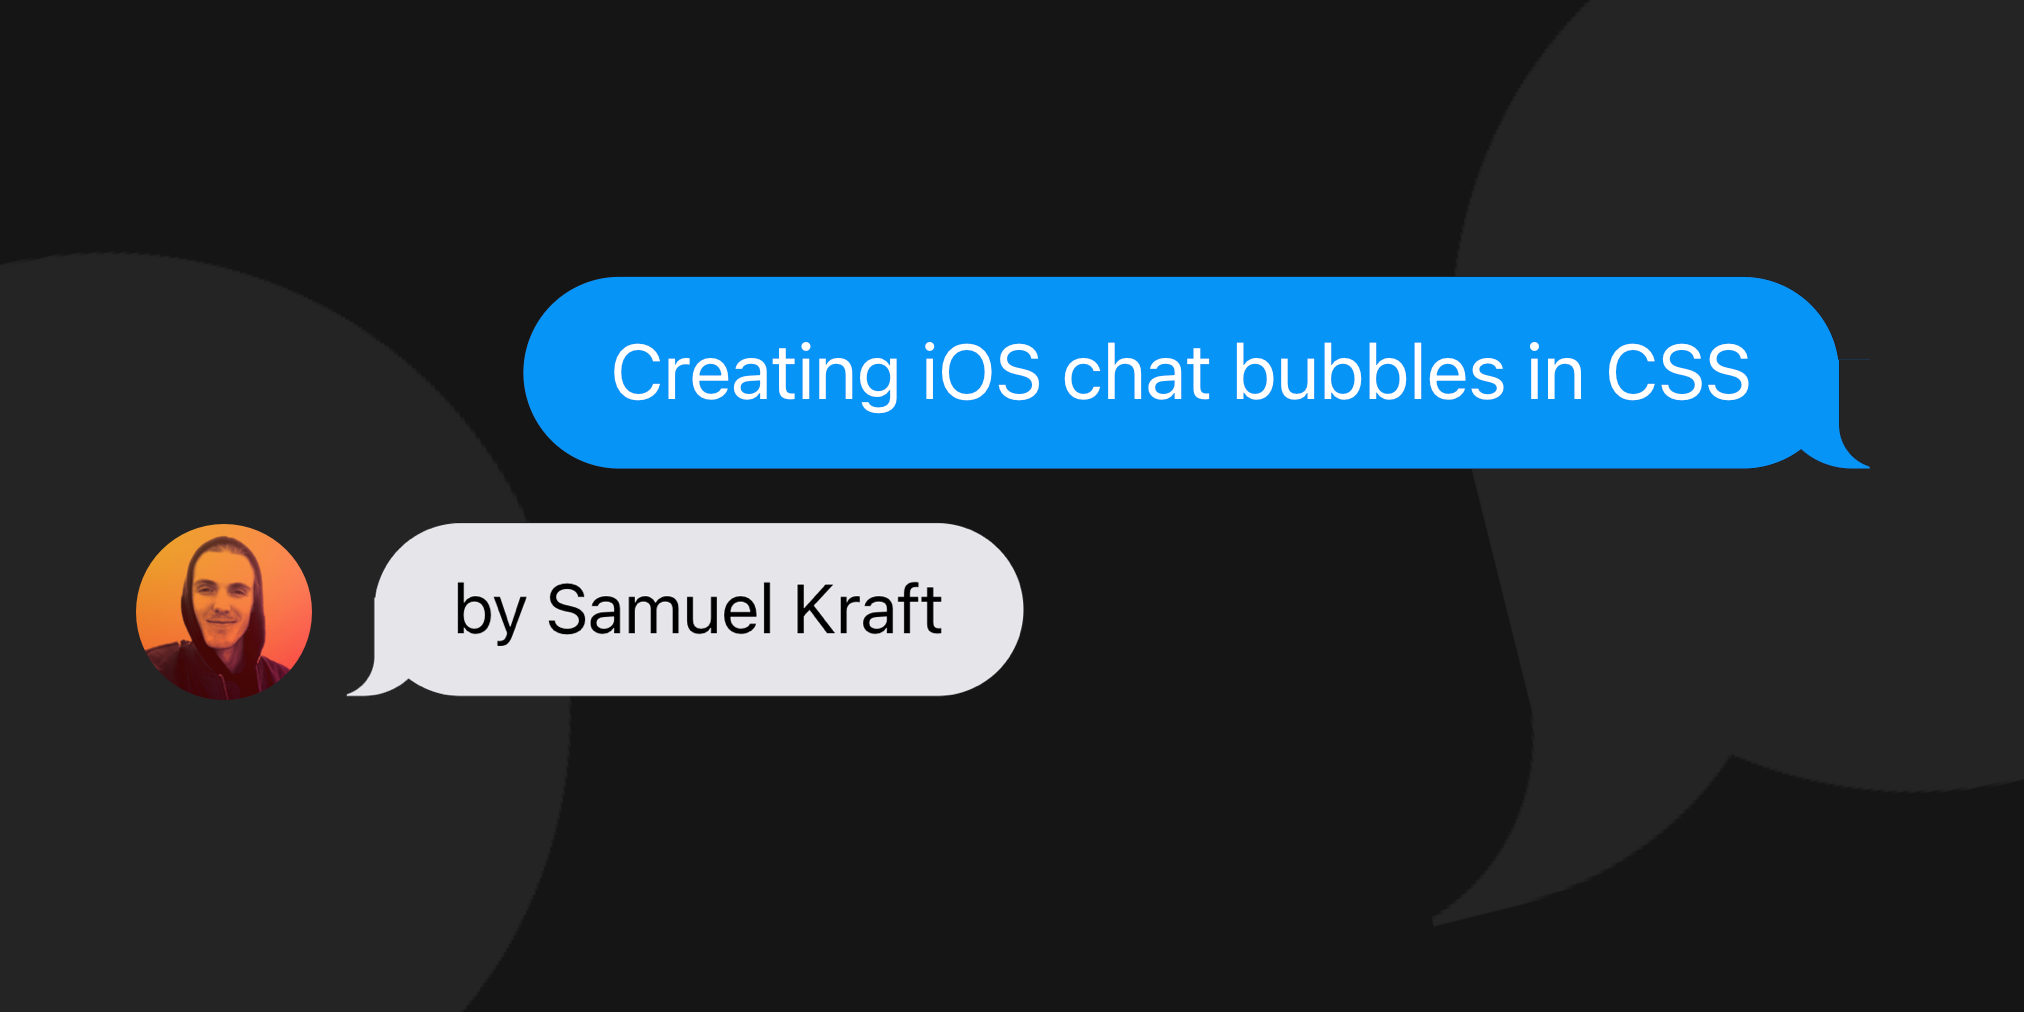 How to create iOS chat bubbles in CSS